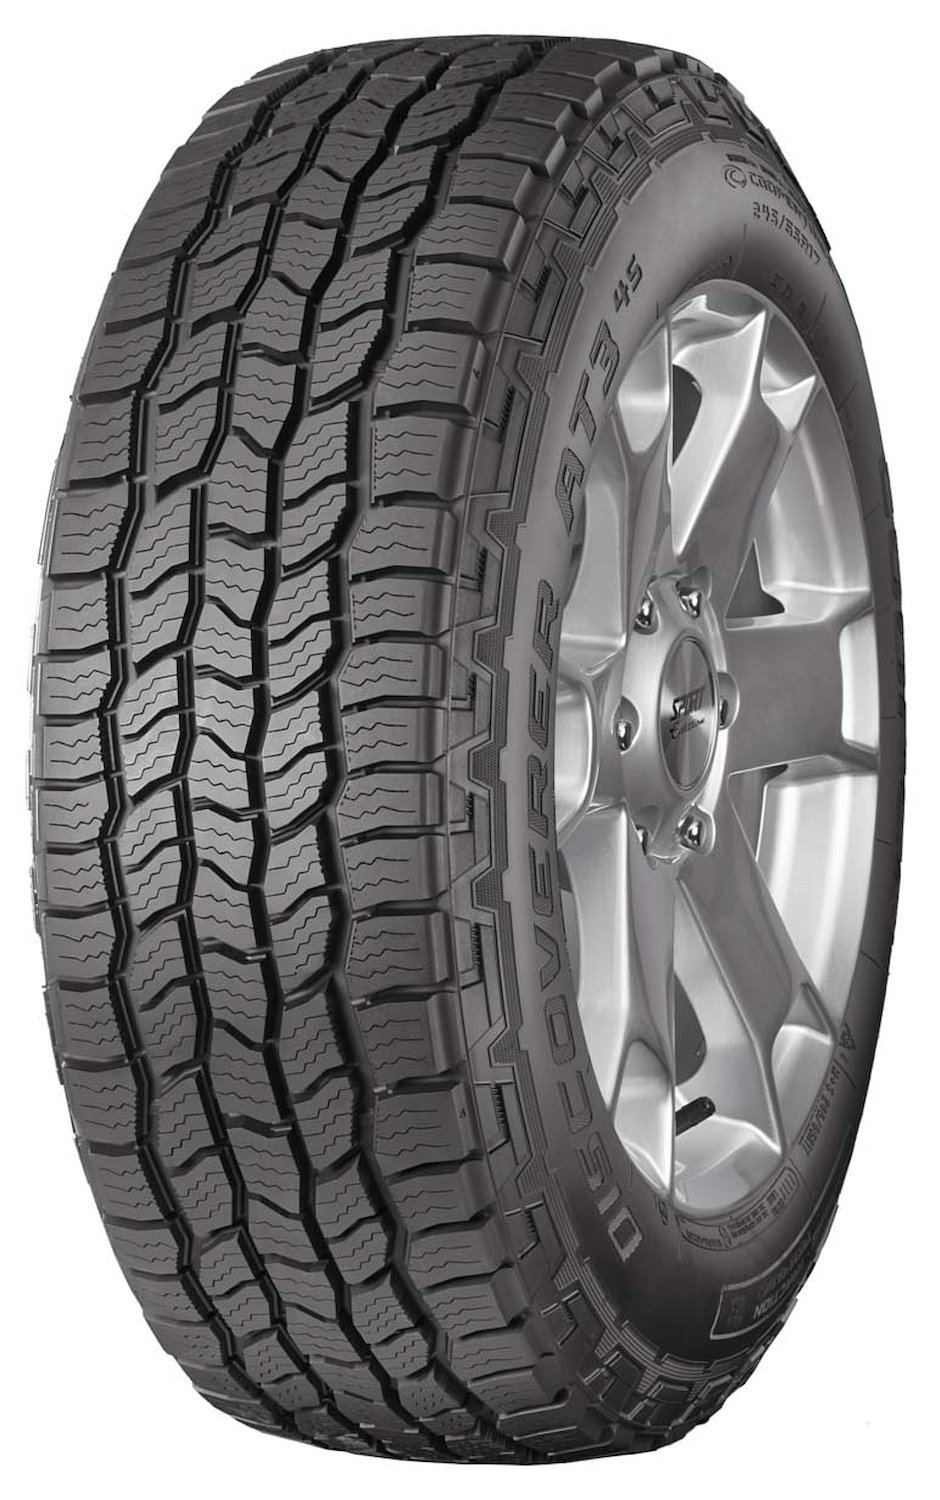 Discoverer AT3 4S All-Terrain Tire, 265/75R16